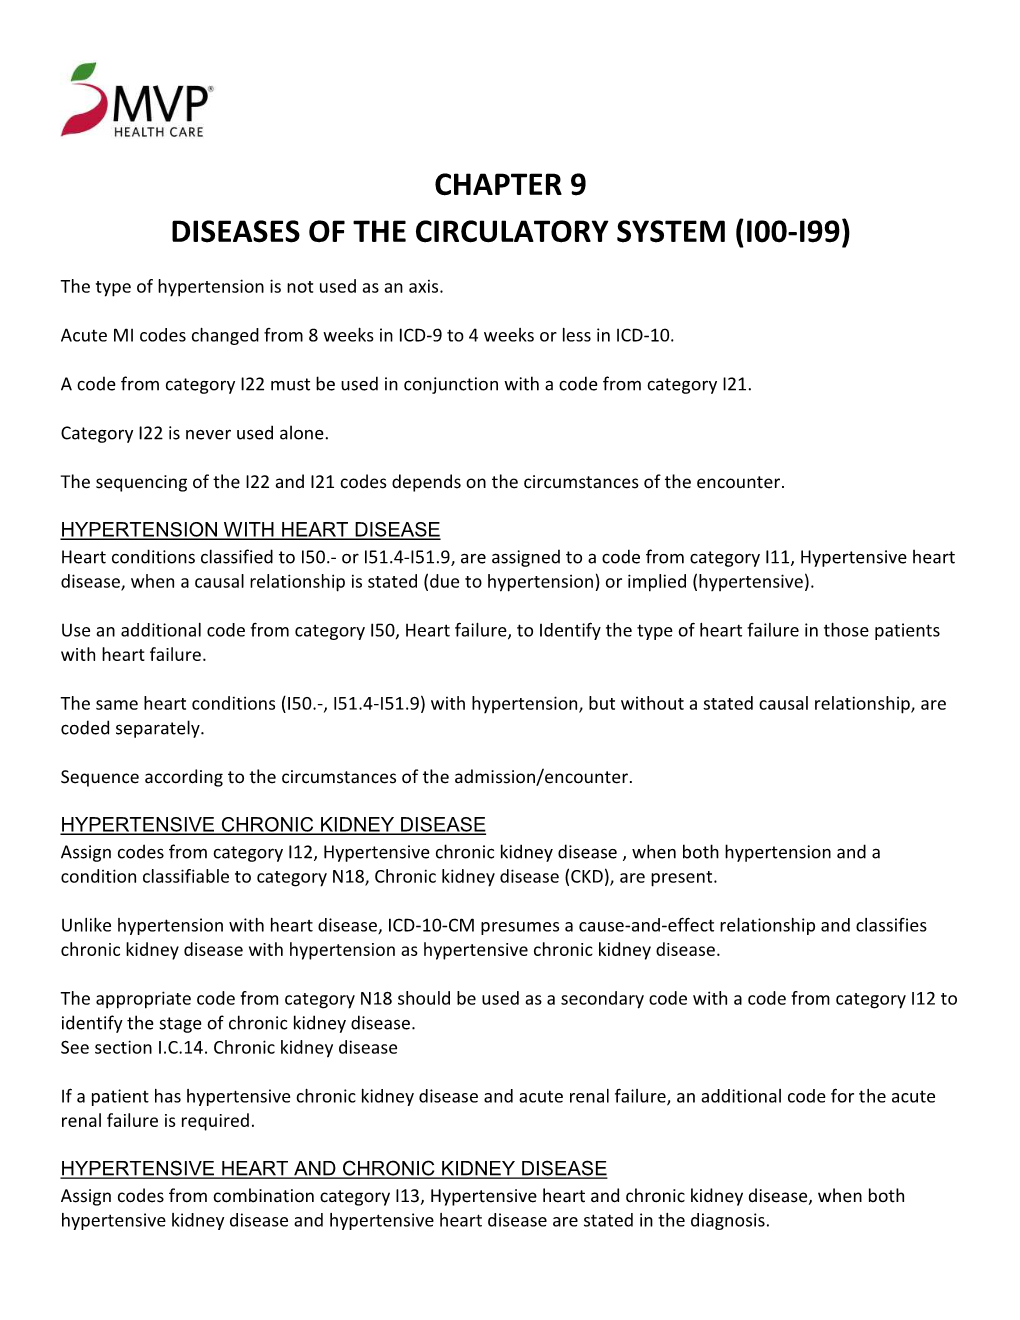 Chapter 9 Diseases of the Circulatory System (I00-I99)